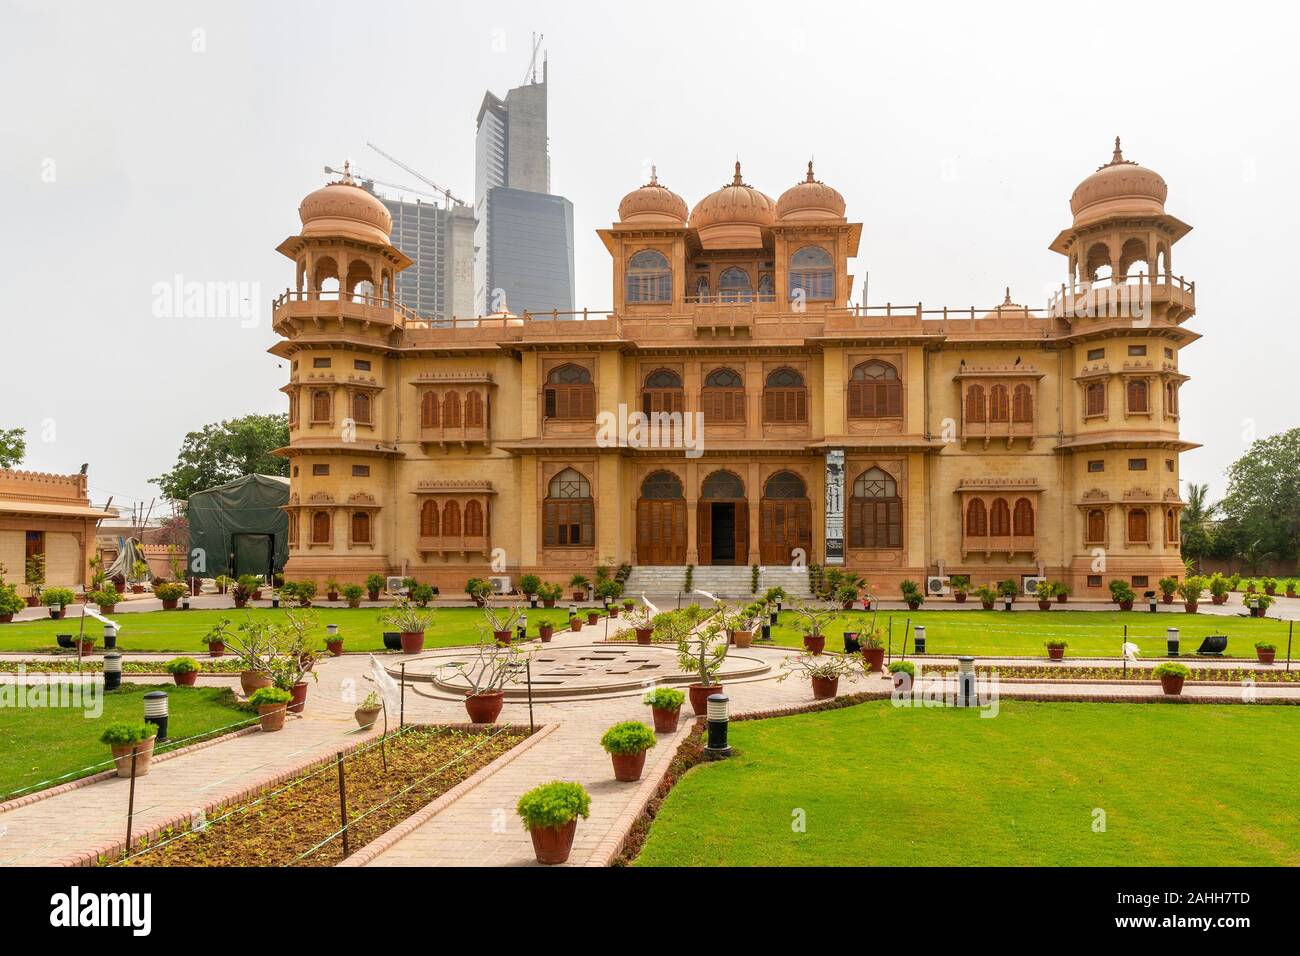 Karachi Mohatta Palace Museum Picturesque View at Hatim Alvi Road with Garden on a Cloudy Day Stock Photo